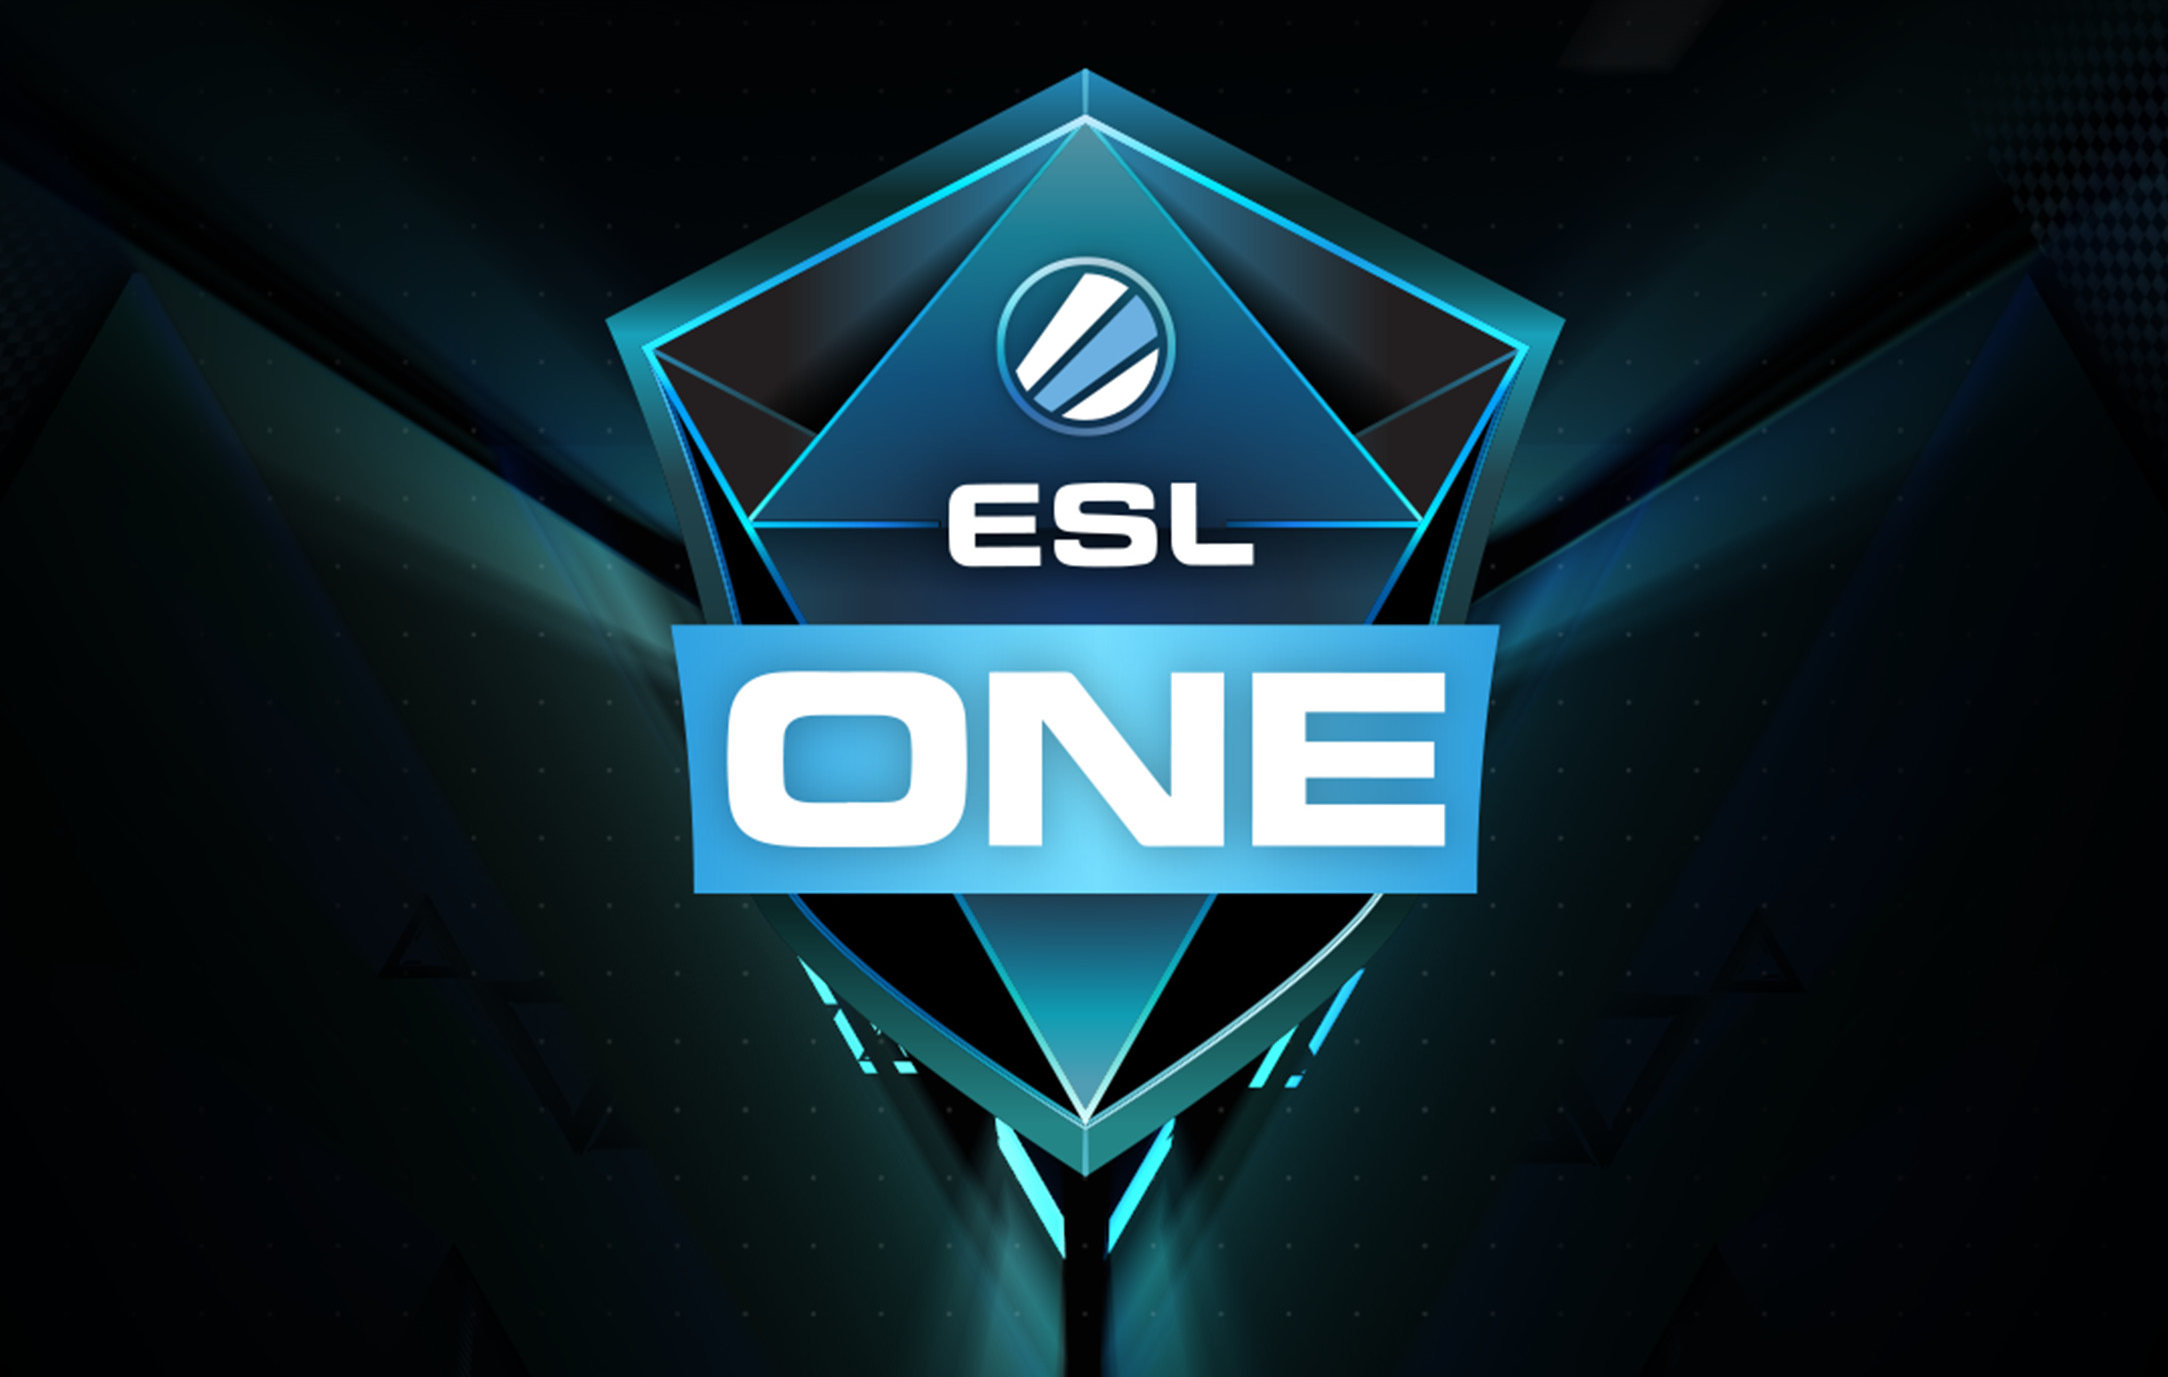 How to Watch ESL One Live (ES)